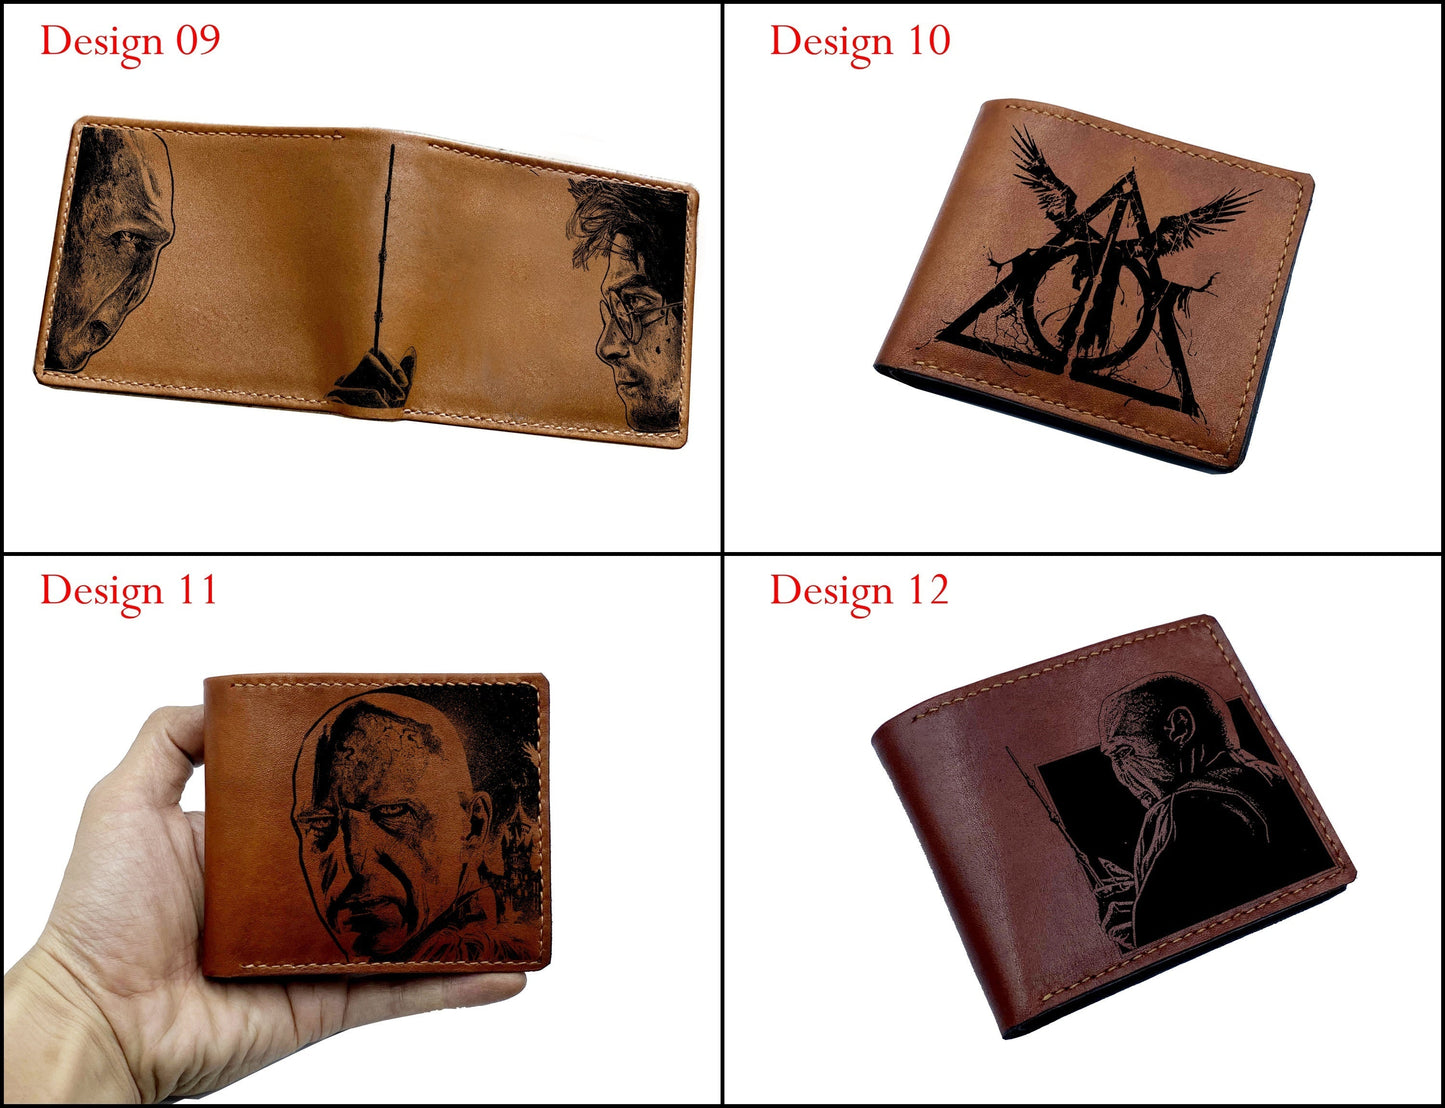 Mayan Corner - Voldemort engraving leather wallet, customized Harry Porter characters leather gifts, leather anniversary present idea for men